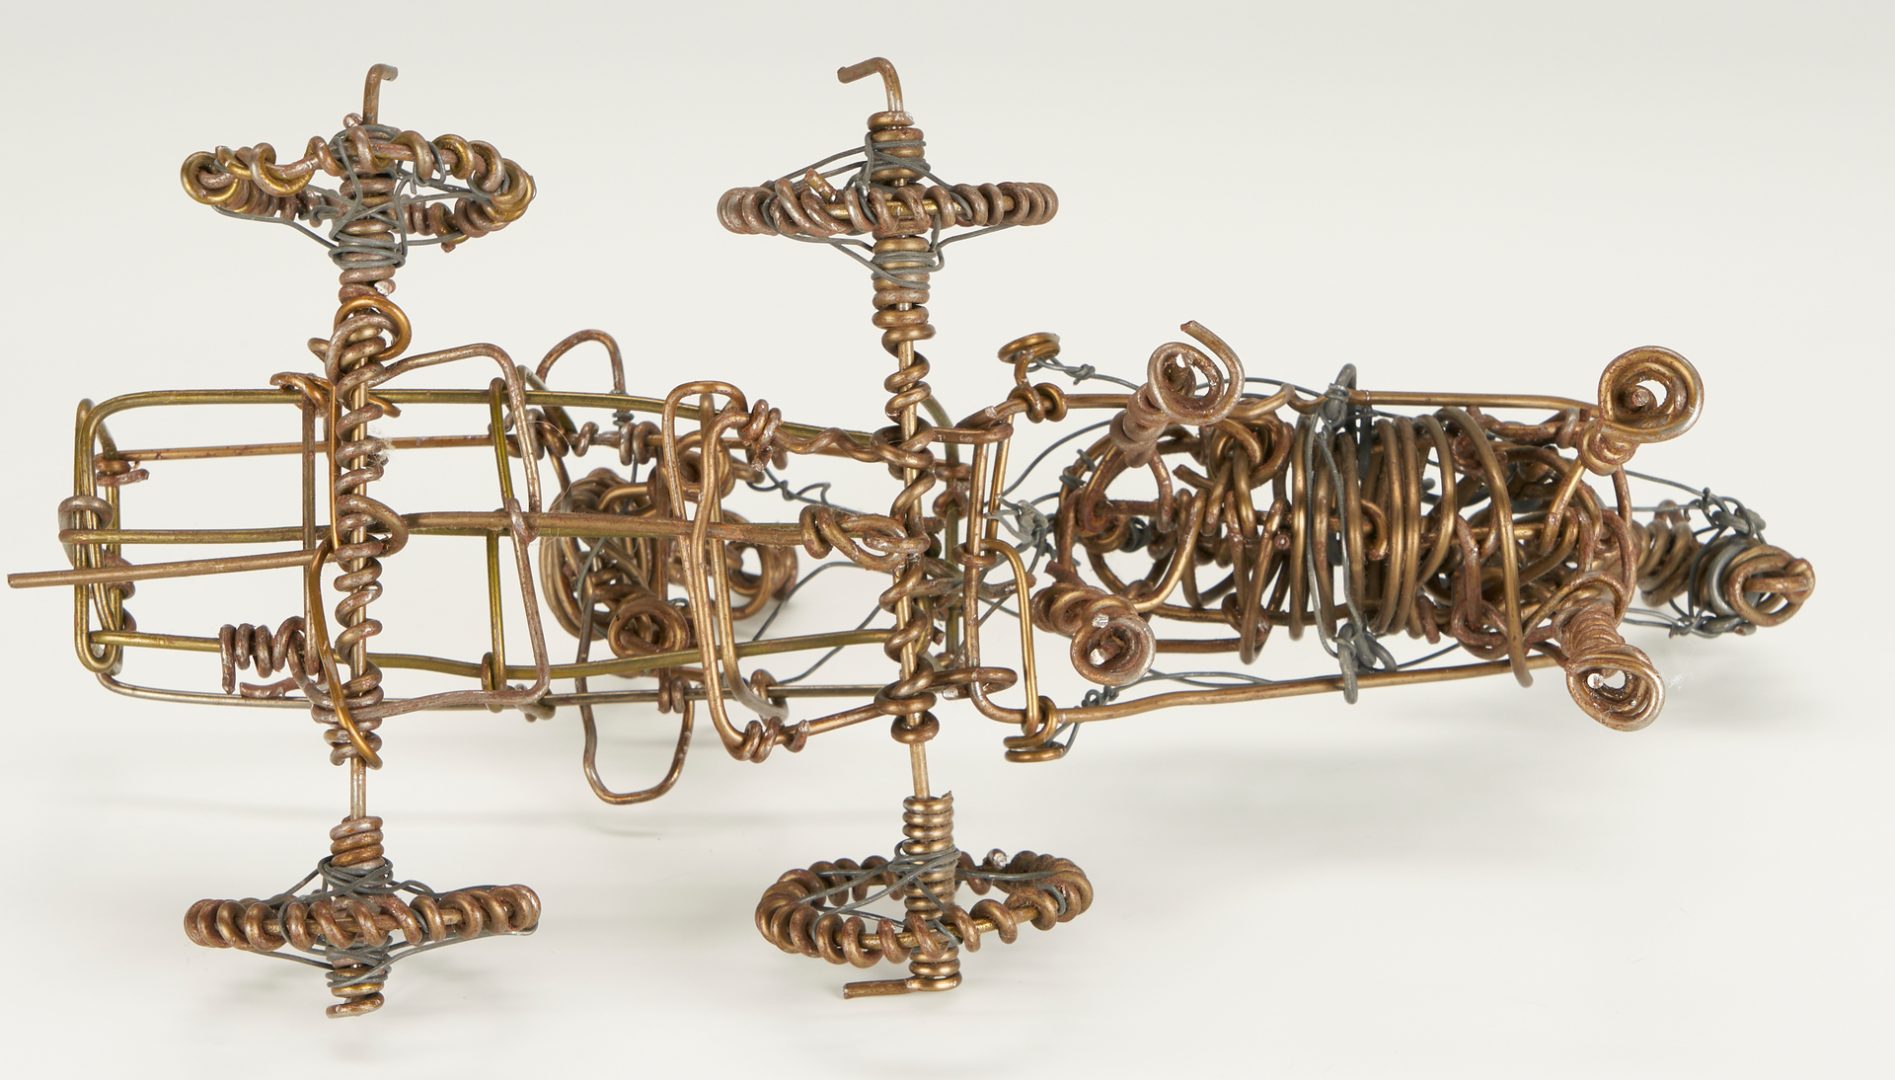 Lot 214: 3 Vannoy Streeter Wire Sculptures, Tina Turner, Buggy, & Motorcycle